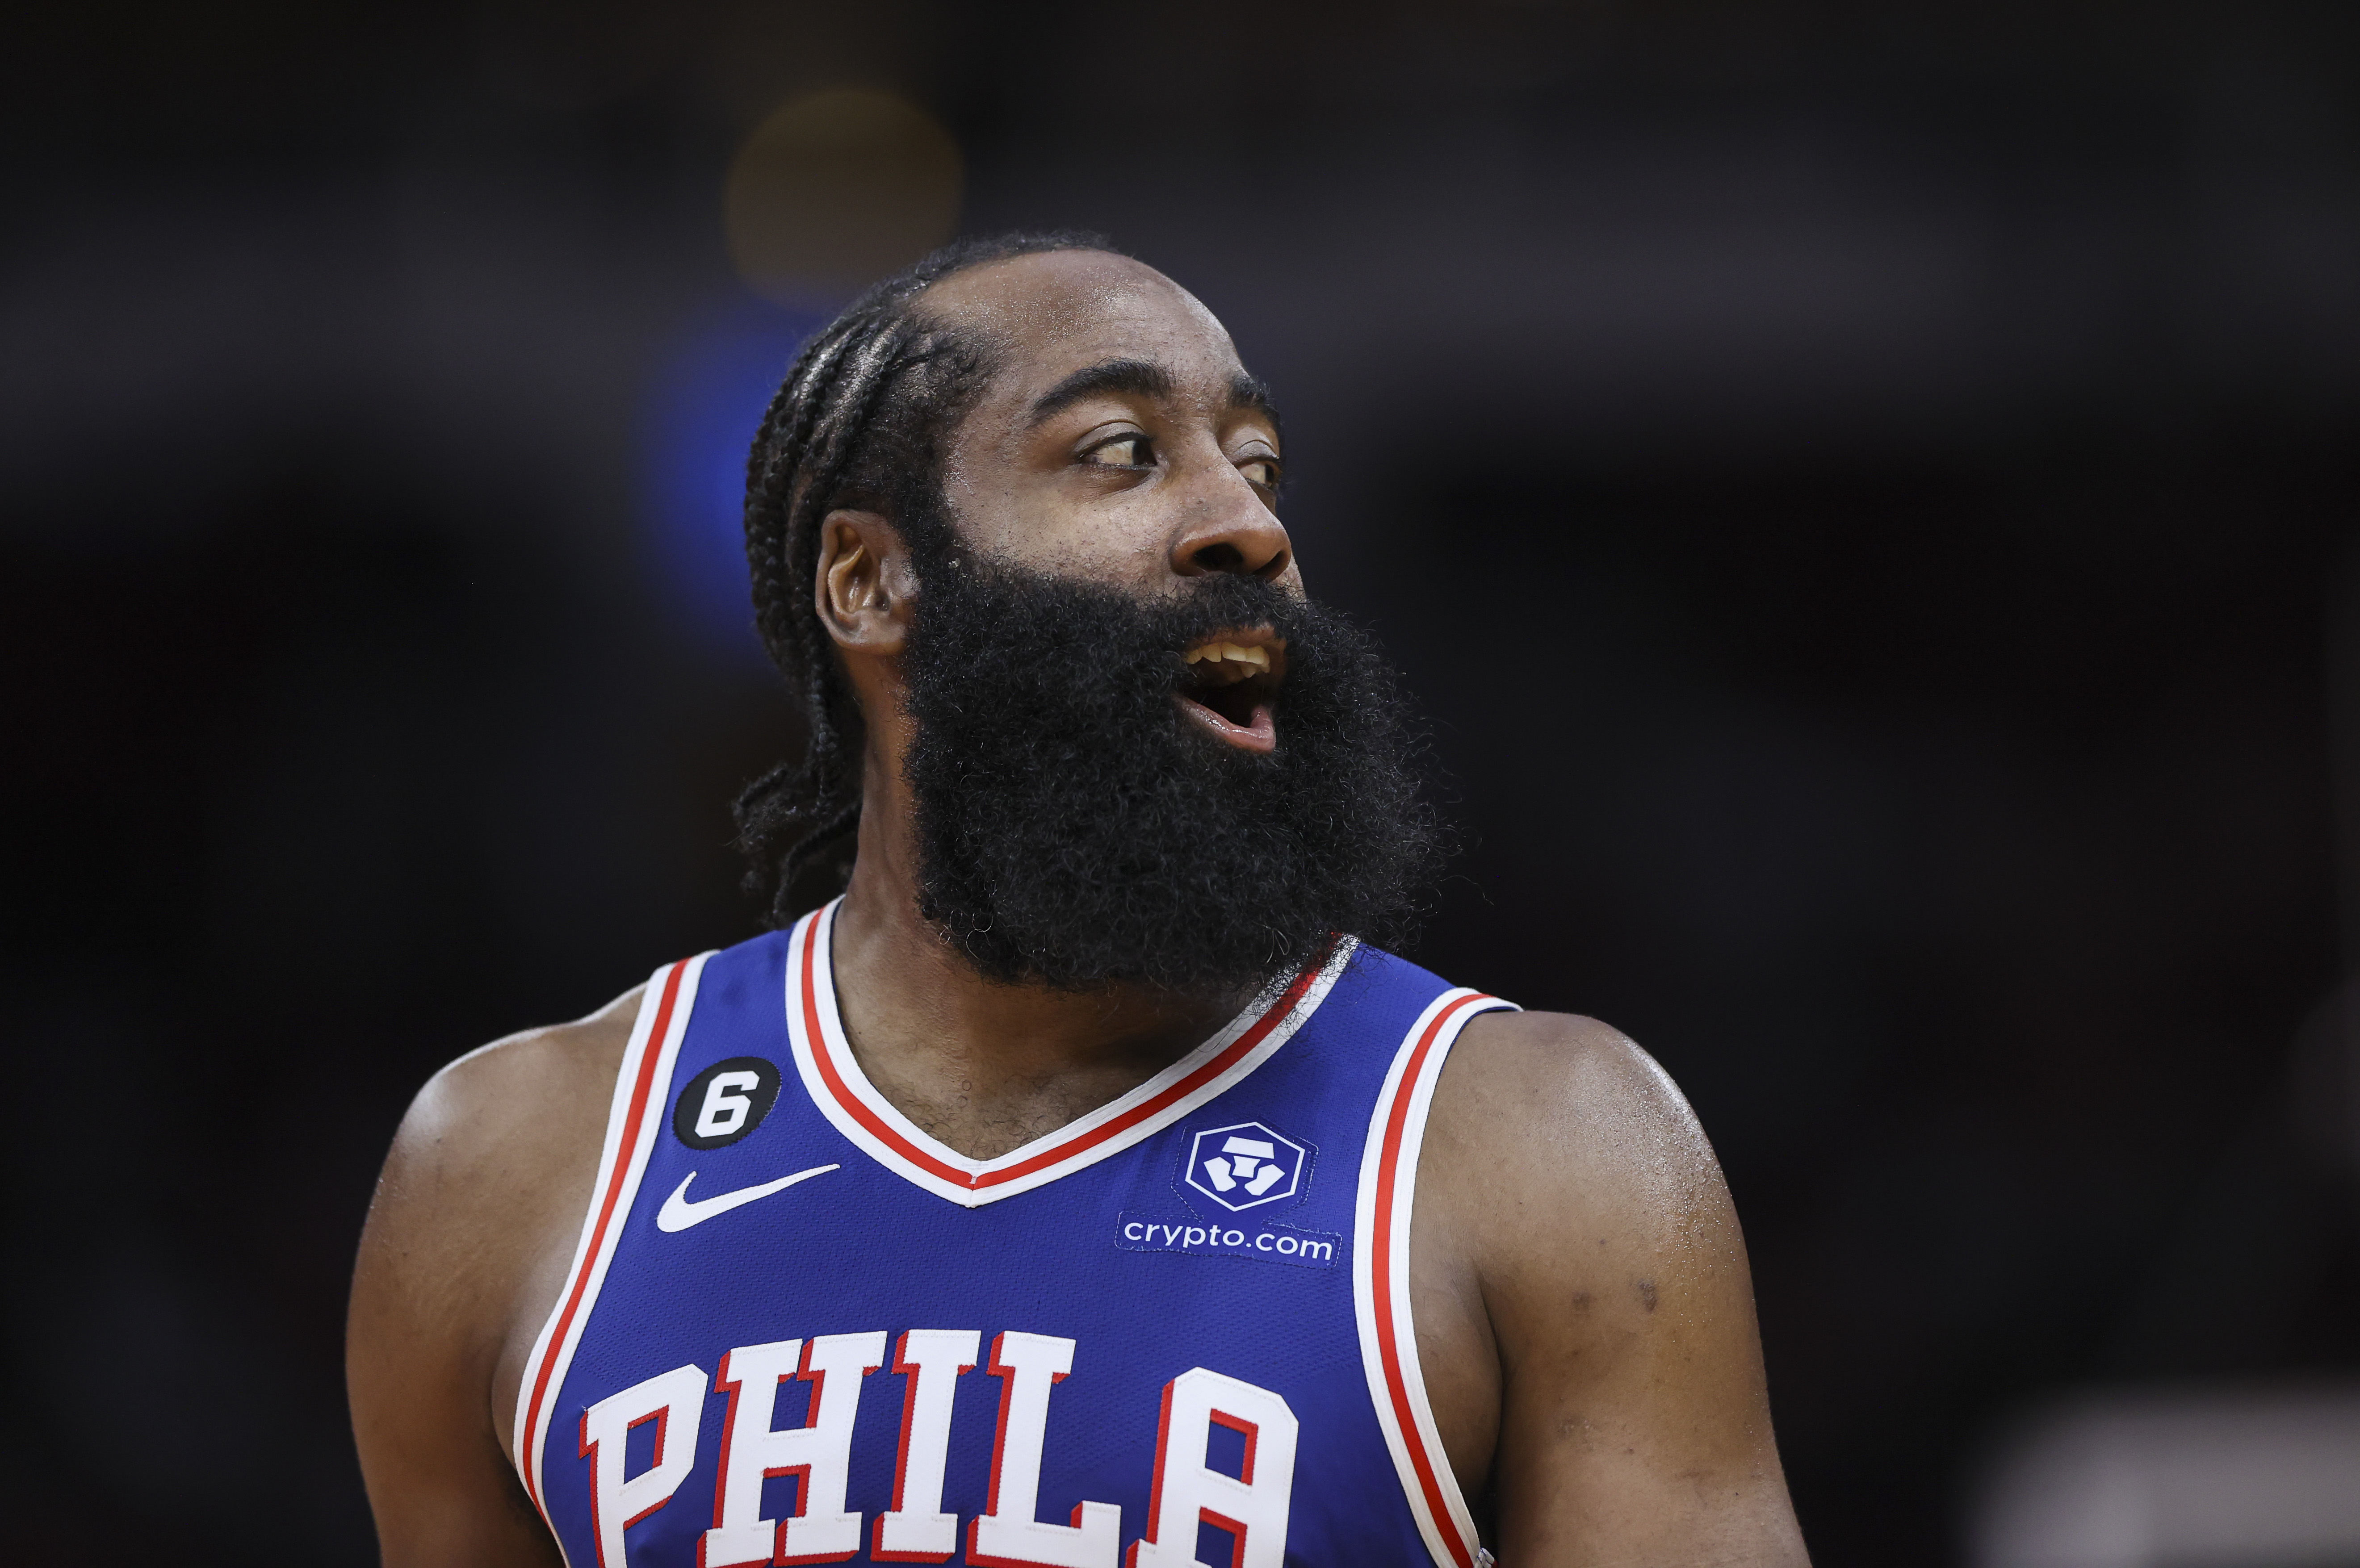 Nets' James Harden knows he's not playing his best